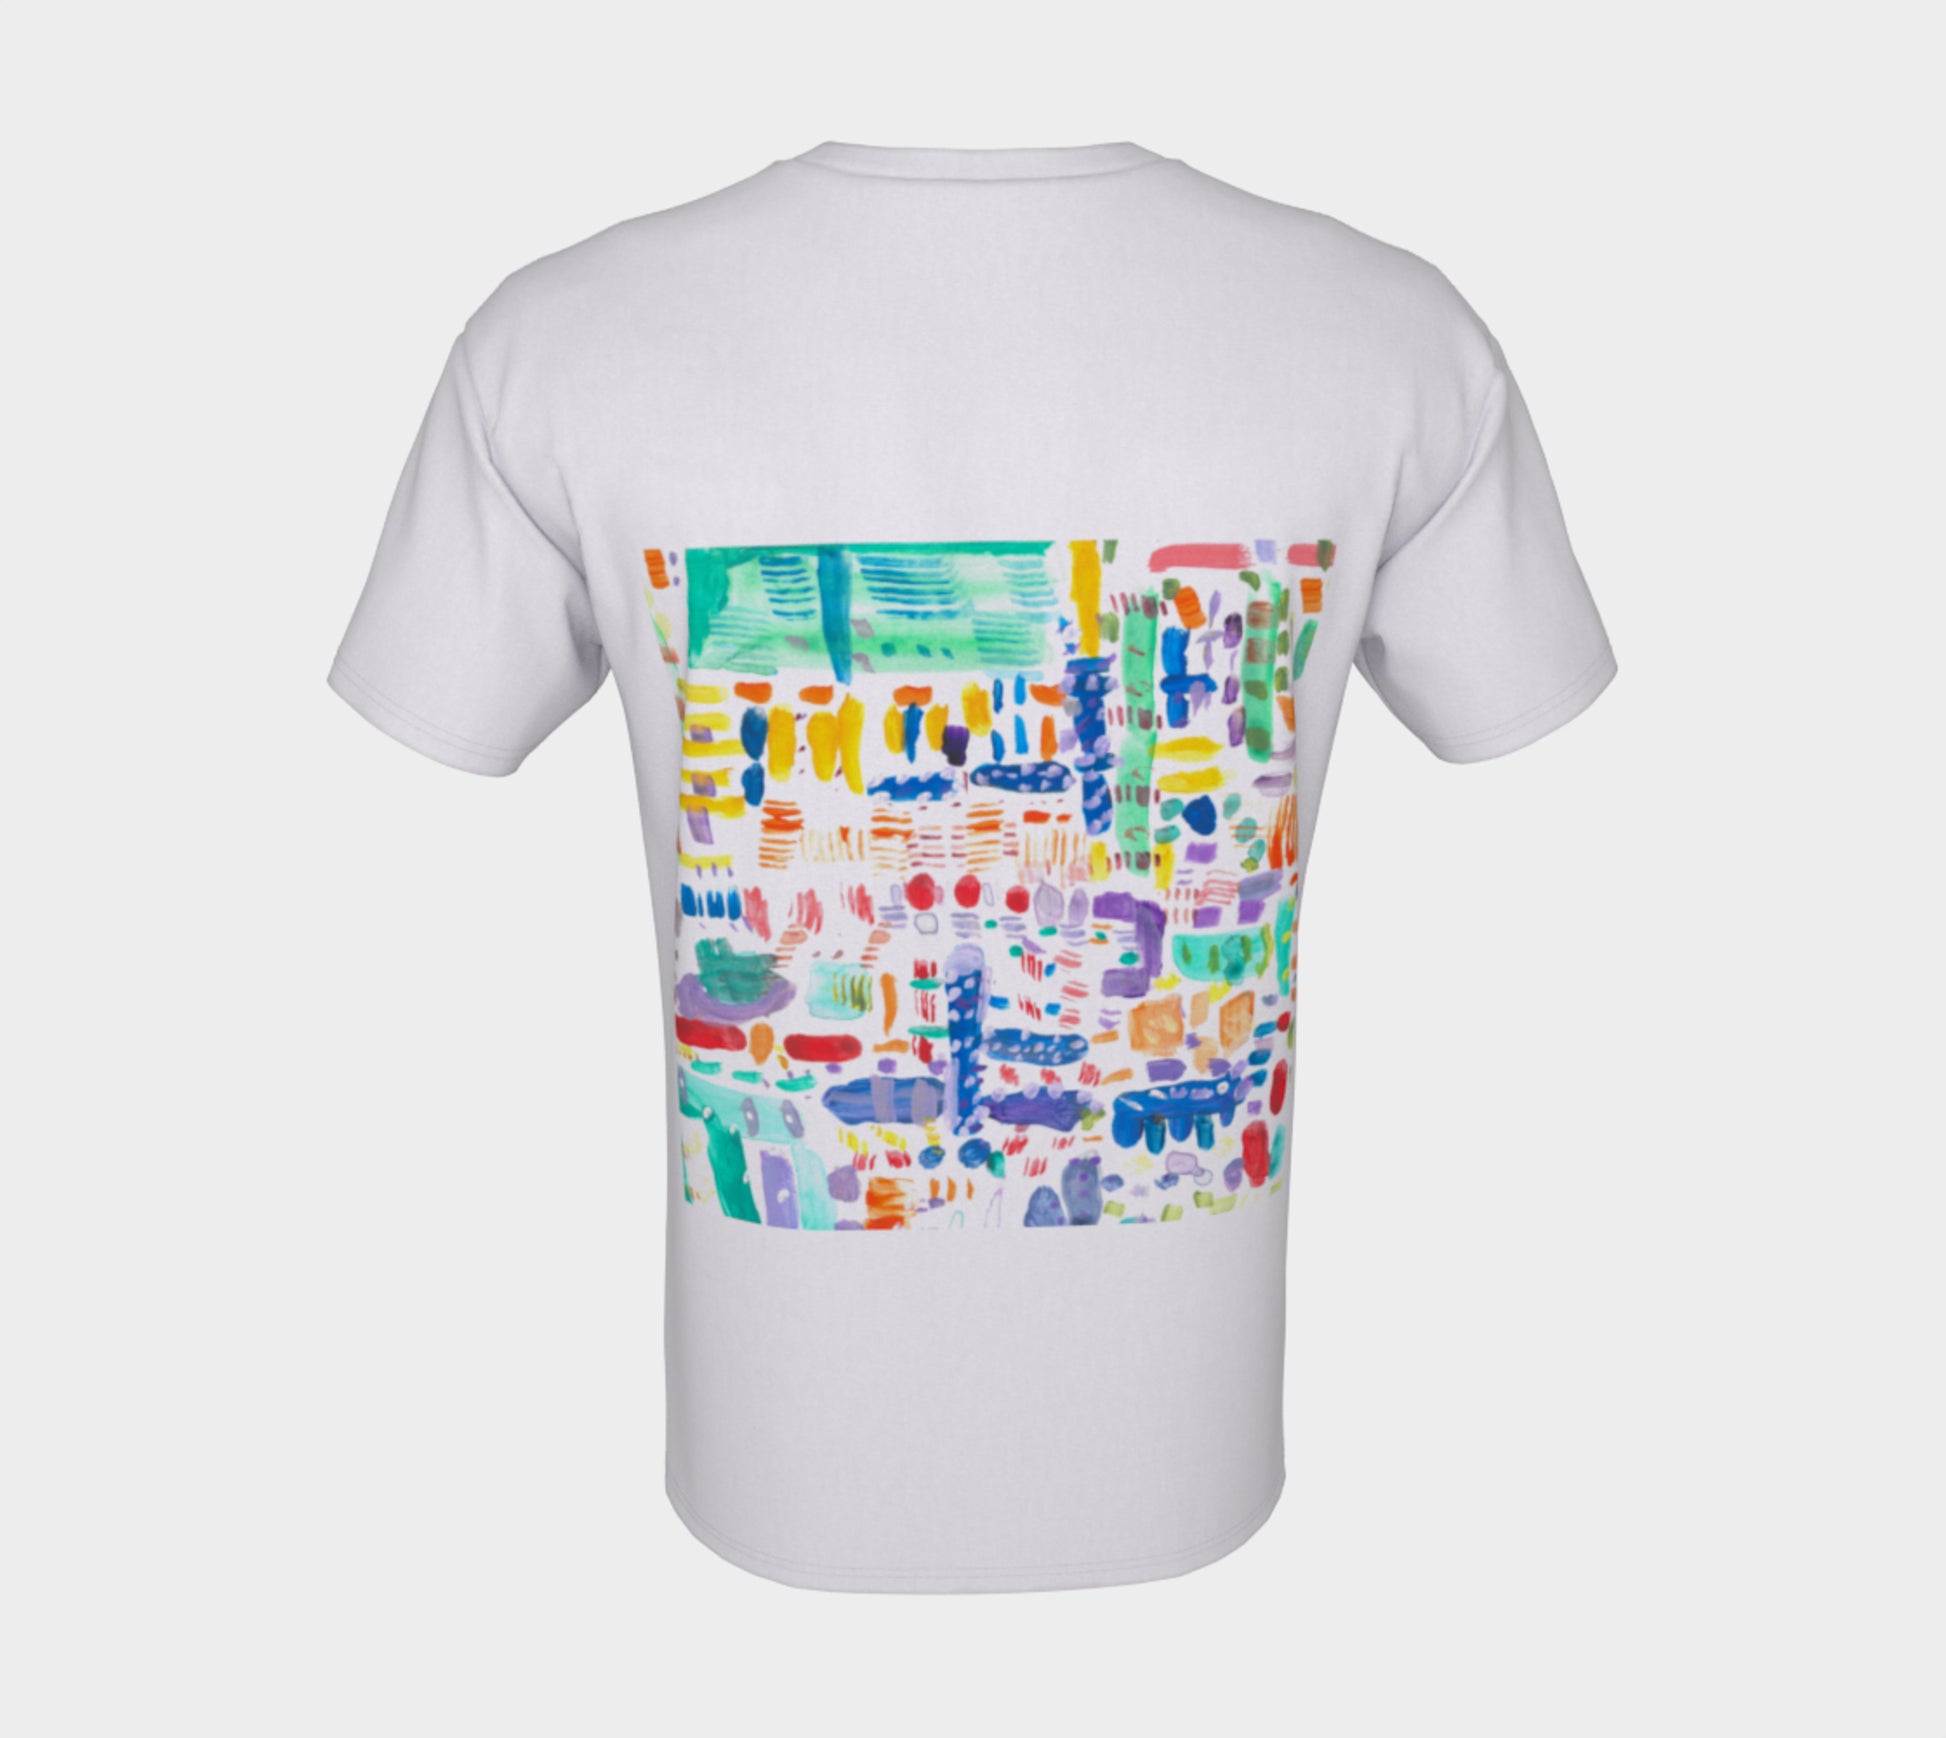 Flat lay view of back of white tshirt depicting square artwork with free form shapes of blue, purple, green, yellow, orange and red colors.